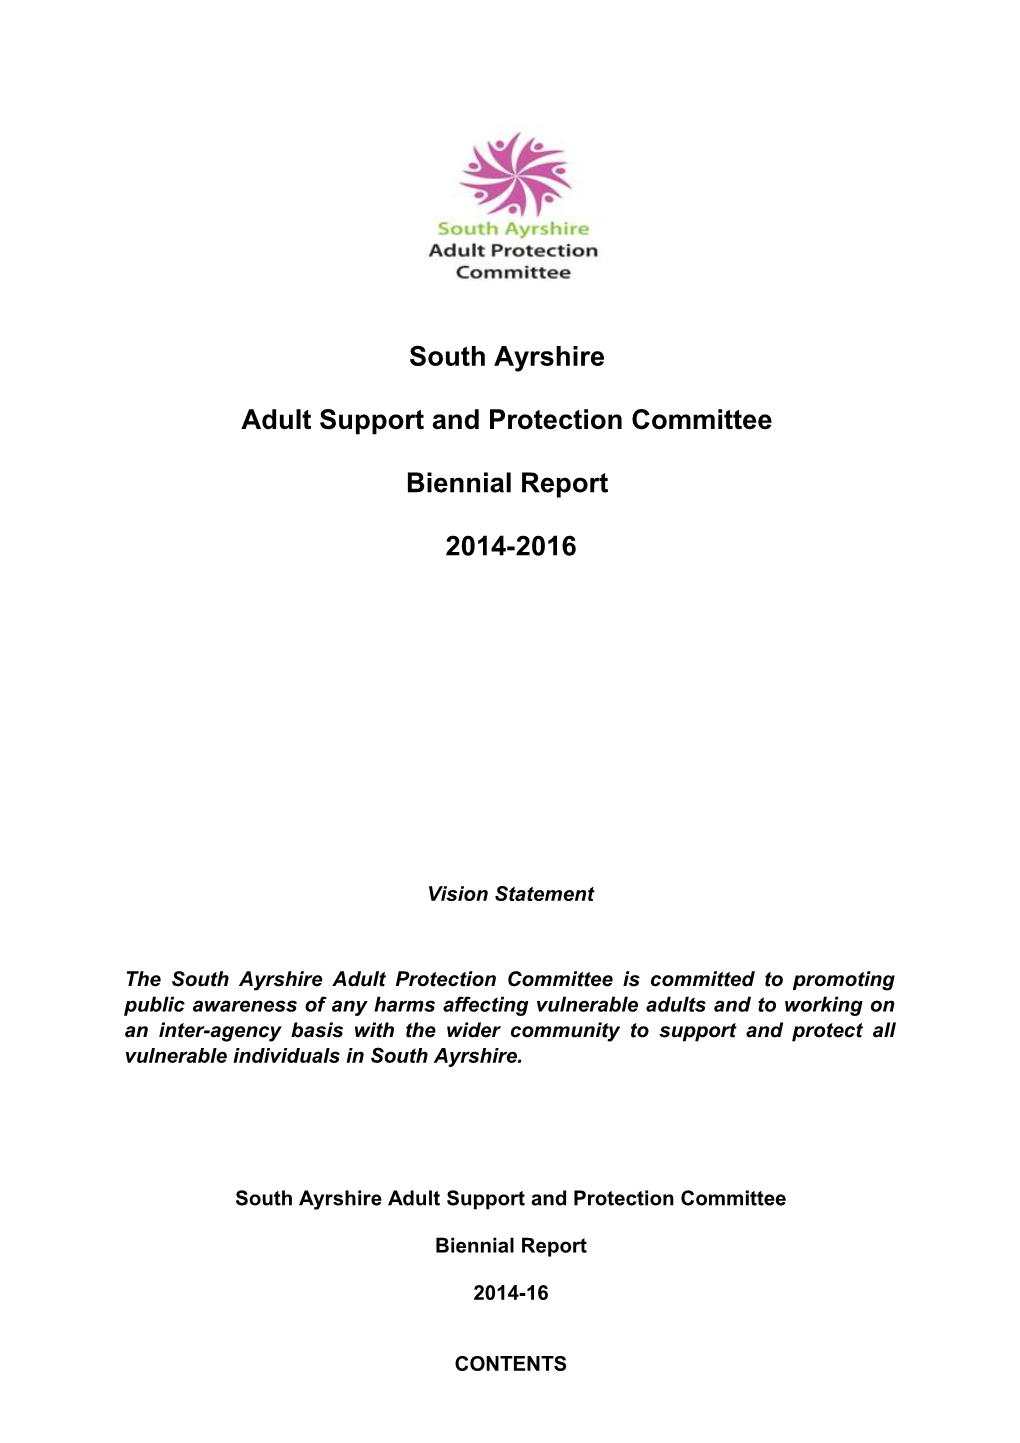 South Ayrshire Adult Support and Protection Committee